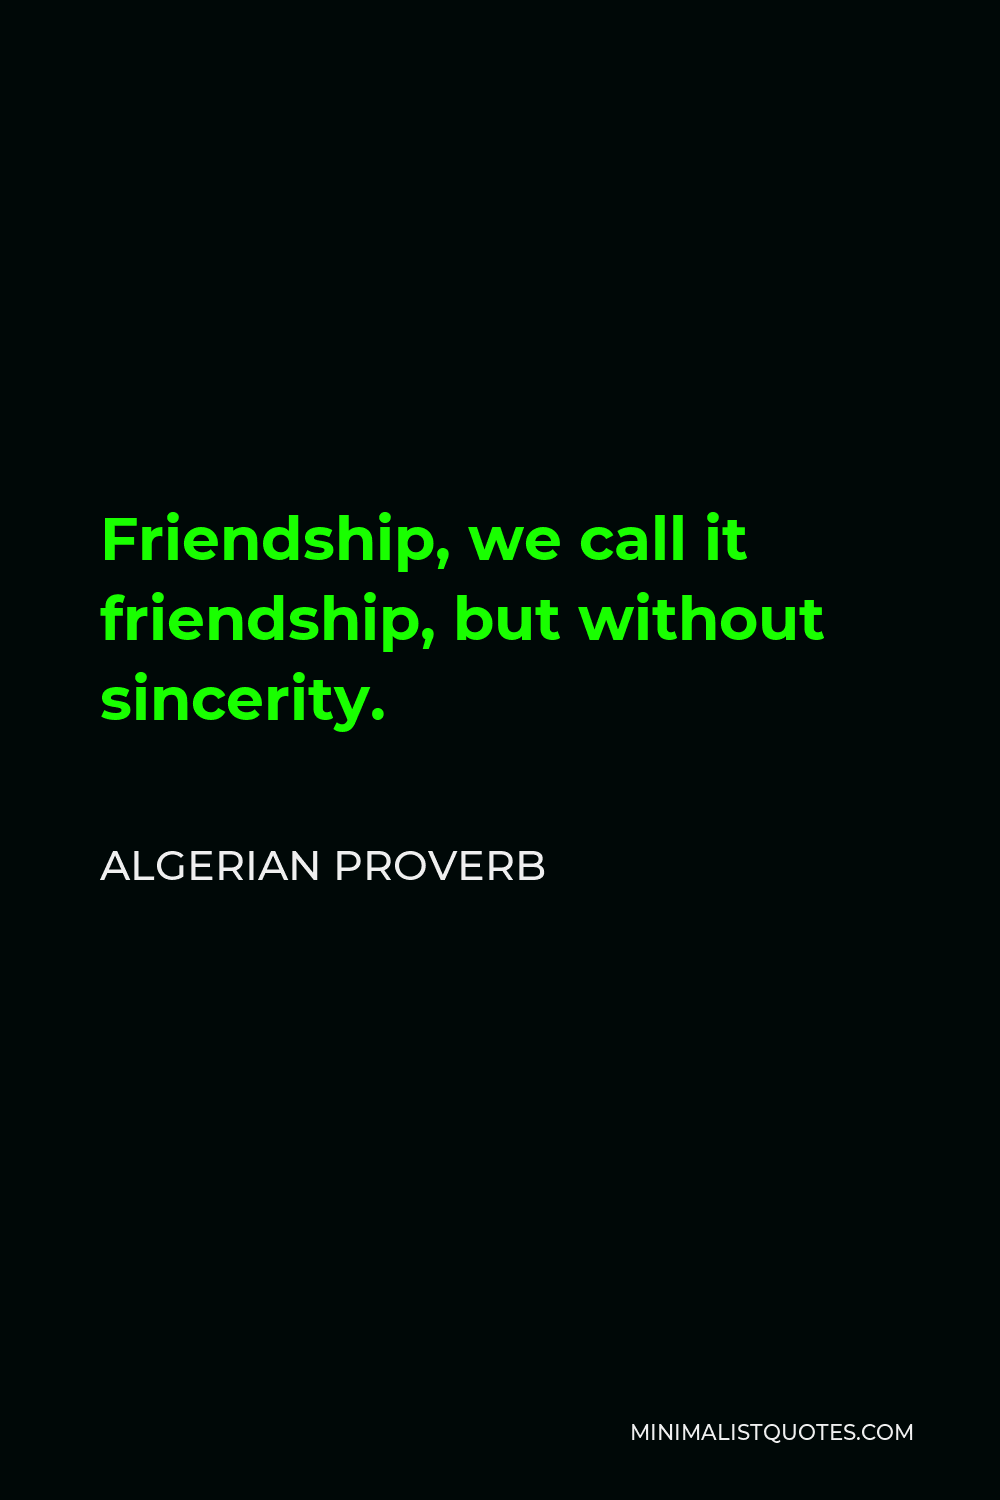 Algerian Proverb Quote - Friendship, we call it friendship, but without sincerity.